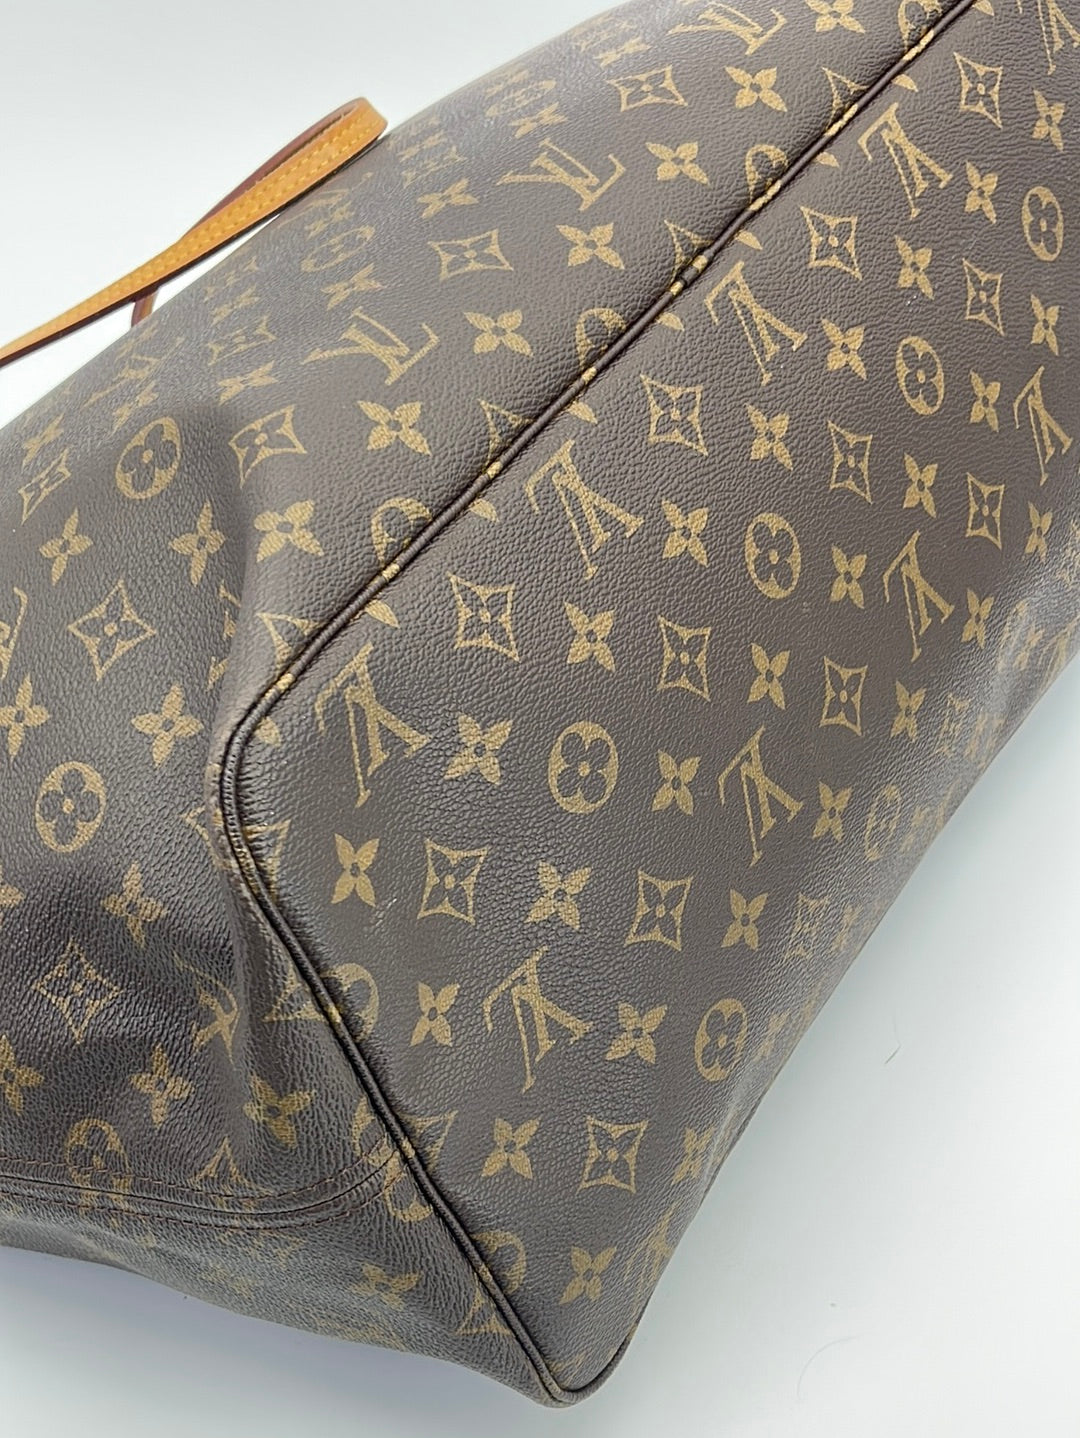 PRELOVED Louis Vuitton Monogram Canvas Neverfull GM Tote Bag SP3180 063023